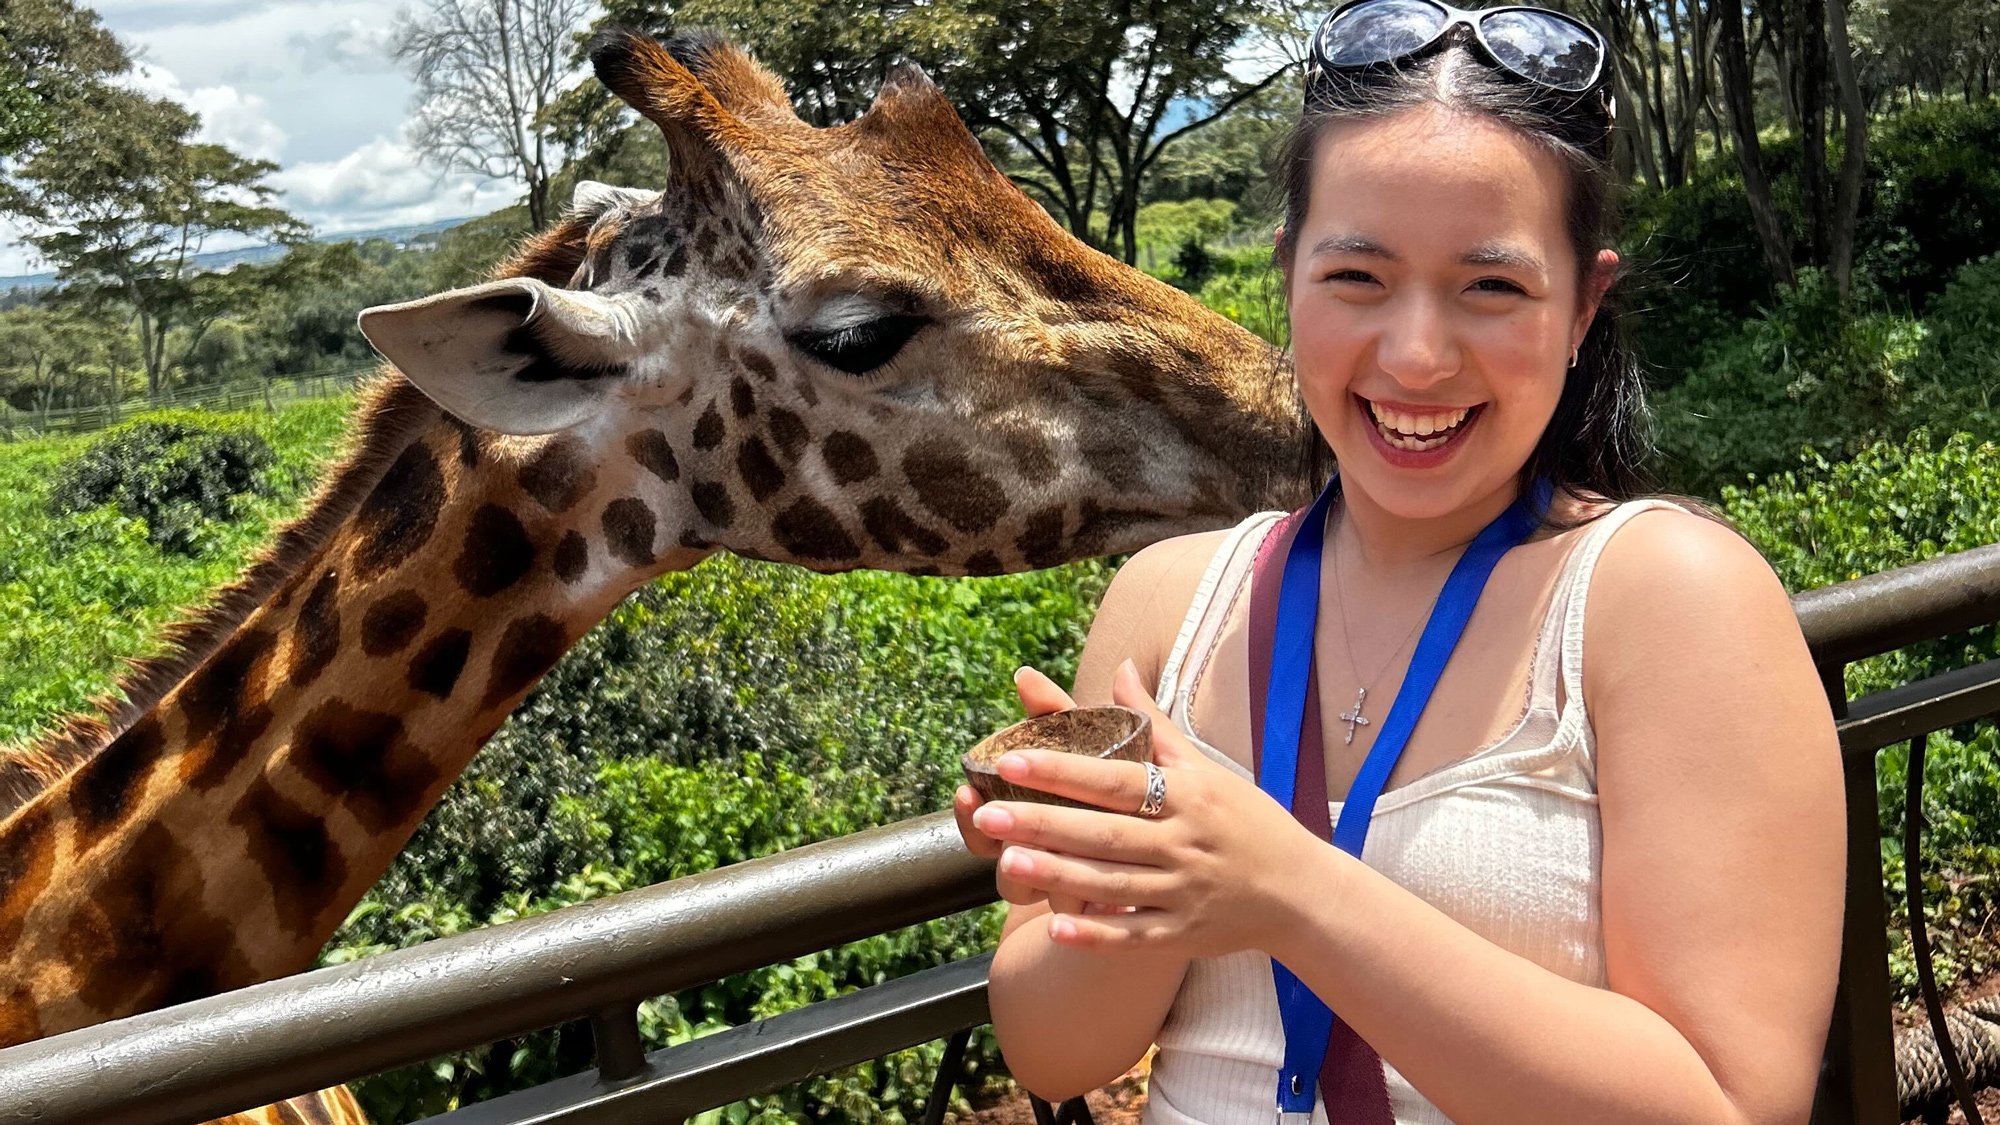 INTL student getting kissed on the neck by a giraffe.